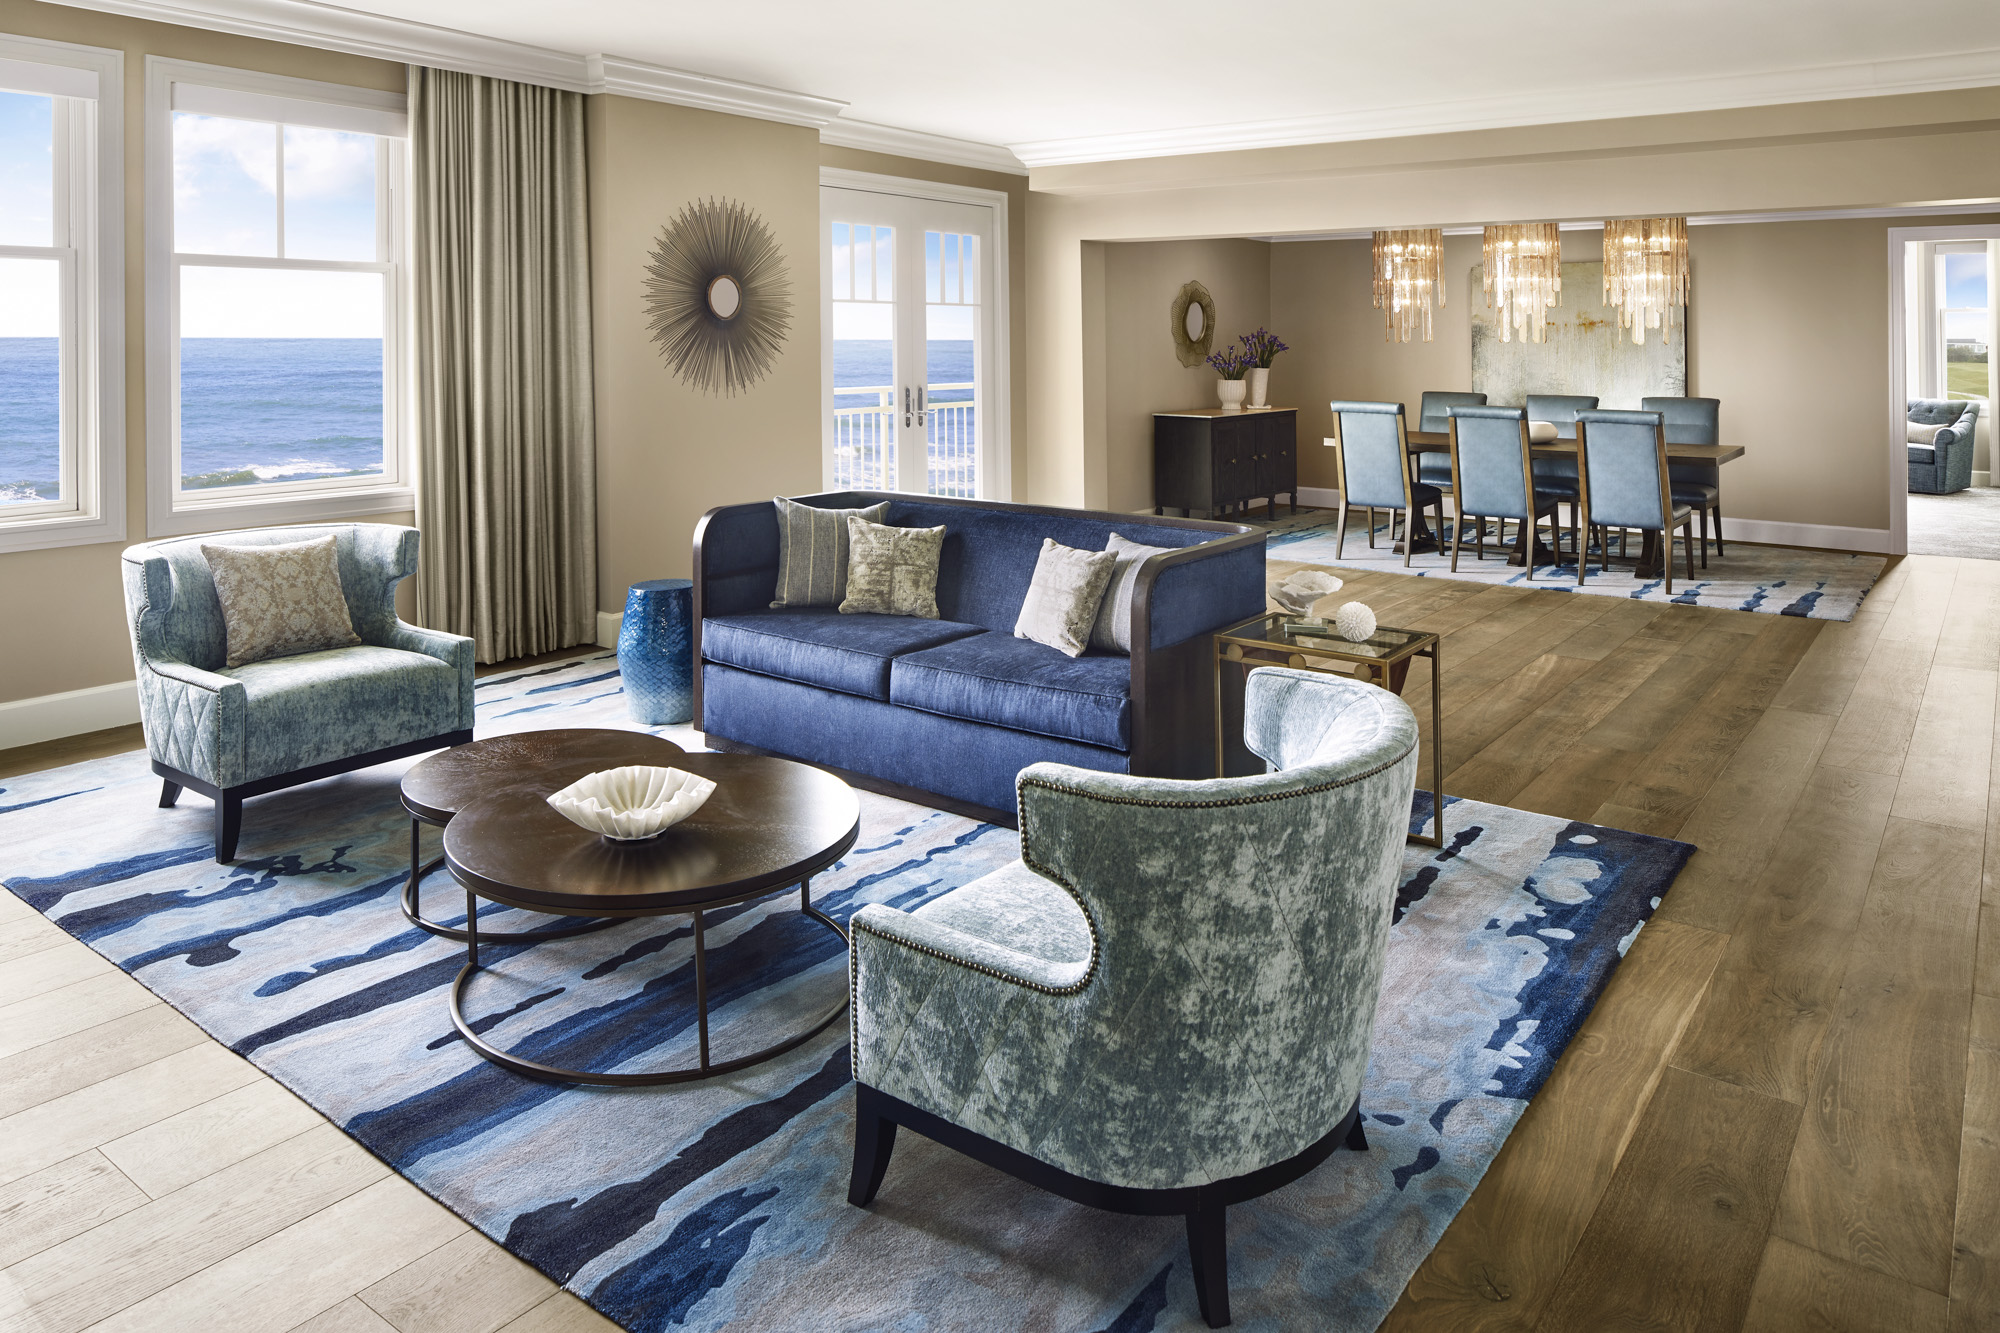 Oceanic Opulence welcomes guests in The Ritz-Carlton Suite featuring sweeping ocean views and a modern design boasting hues of warm resplendent blues and rich golds.